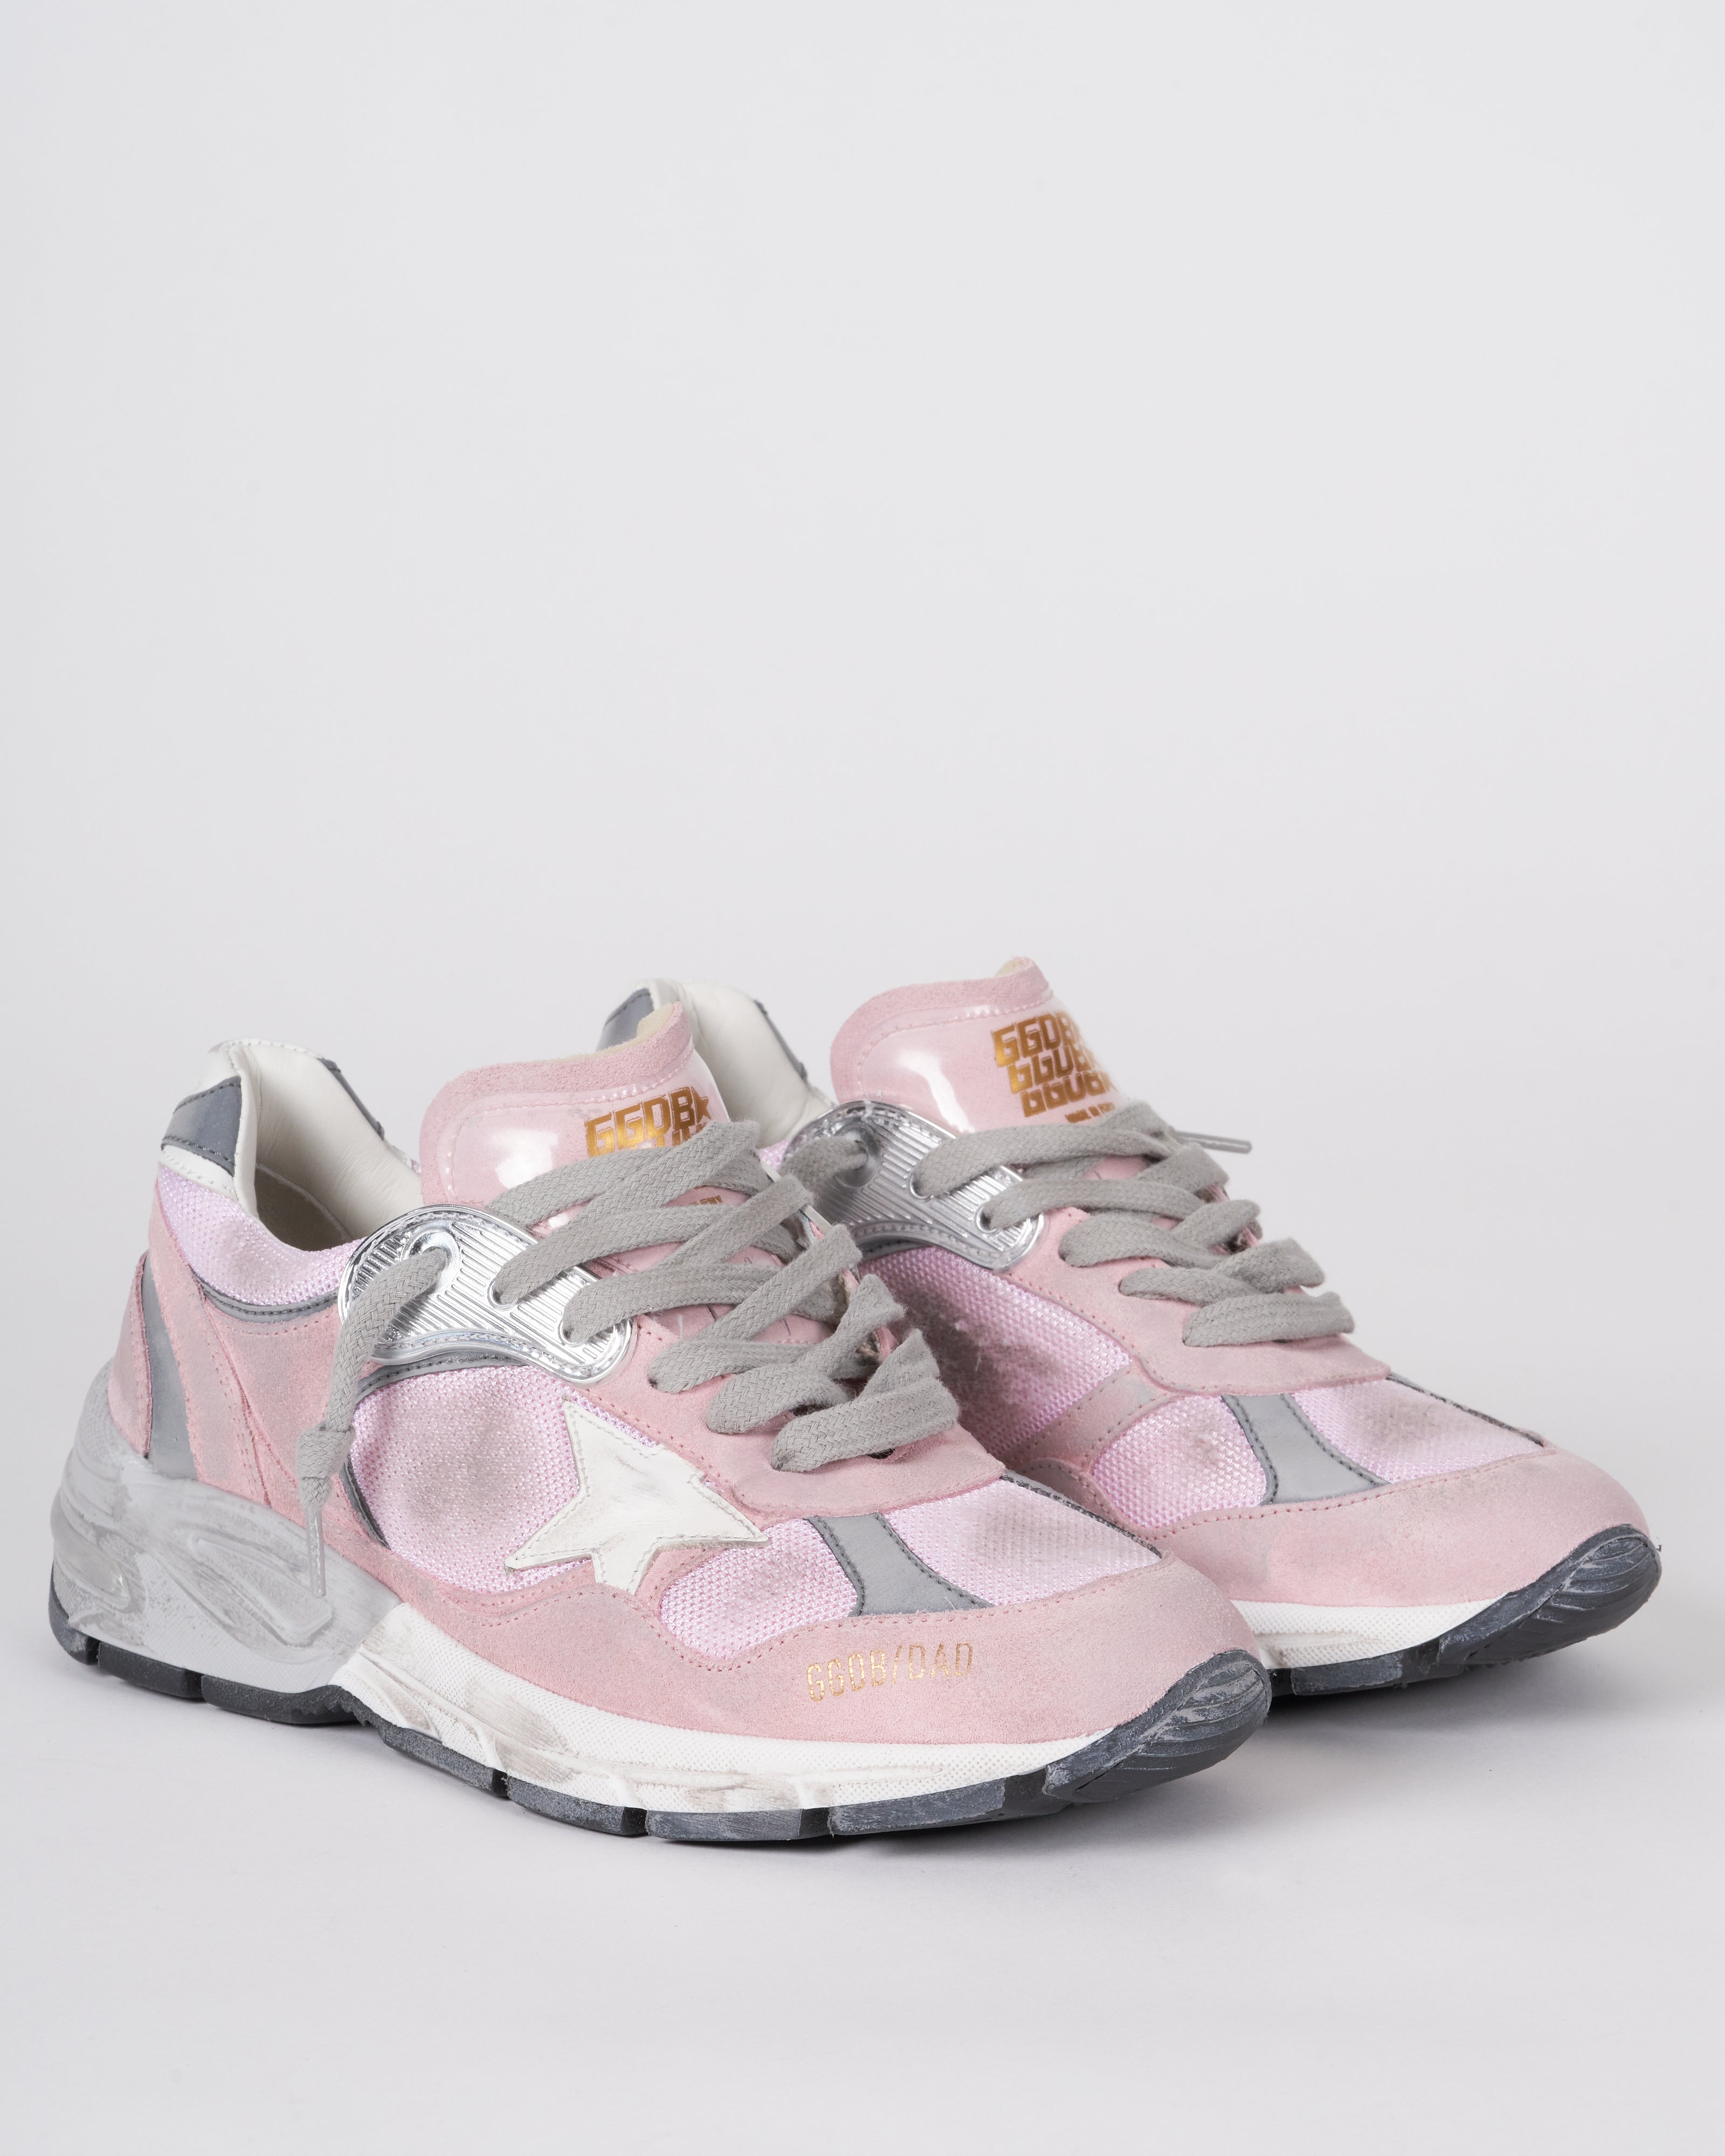 Golden Goose Running Dad Sneaker Leather Pink Suede Mesh 100% Authentic